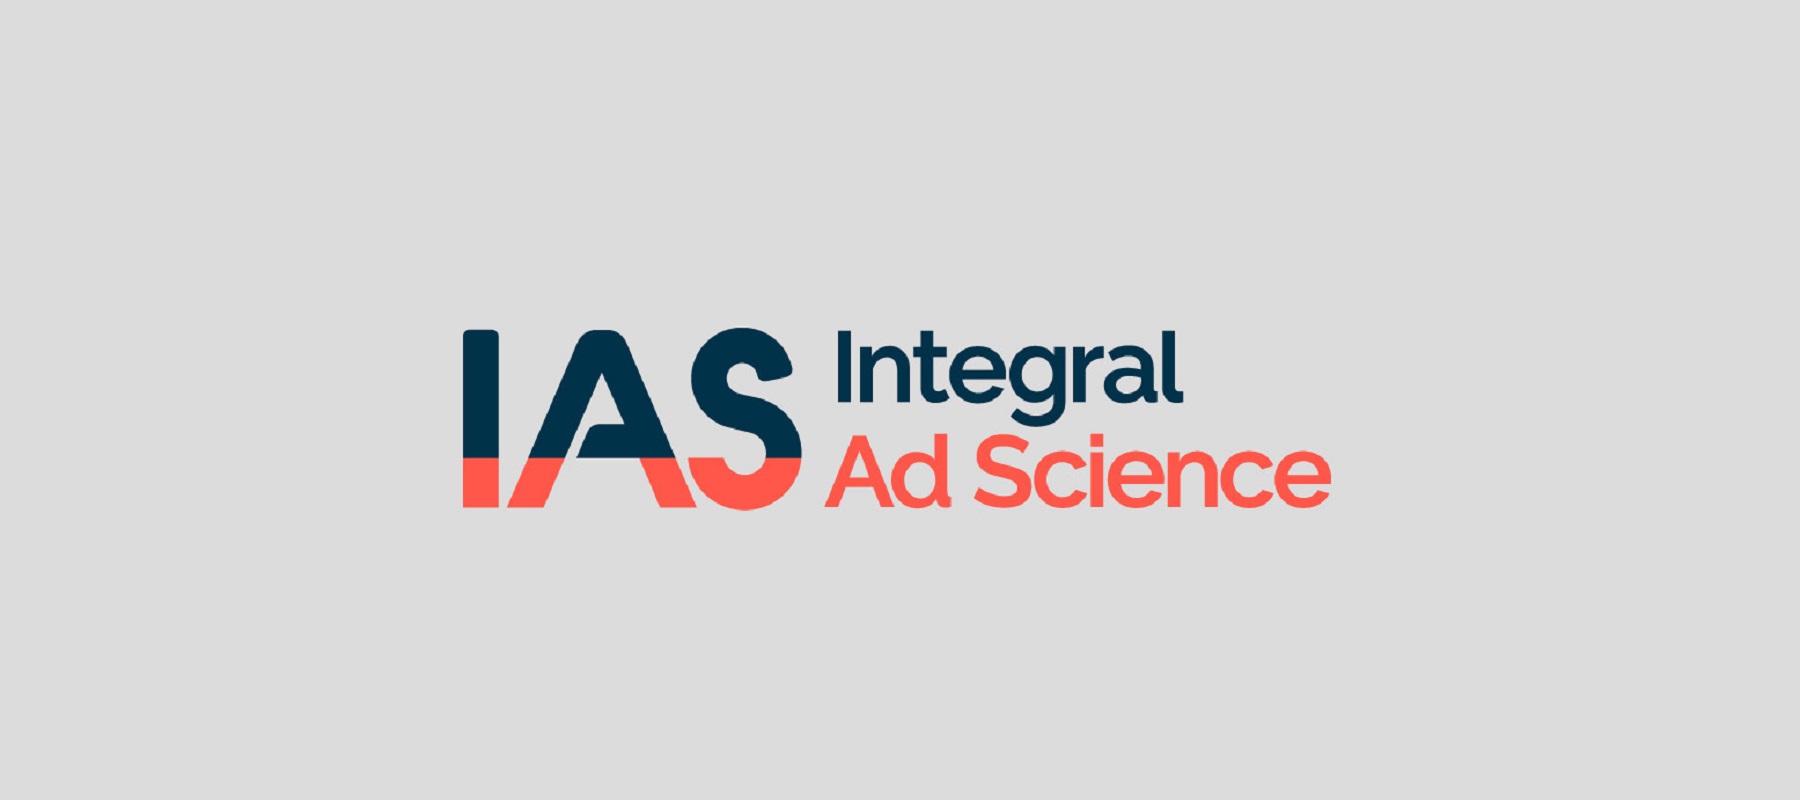 Integral Ad Science earns industry’s first MRC accreditation for CTV viewable impressions